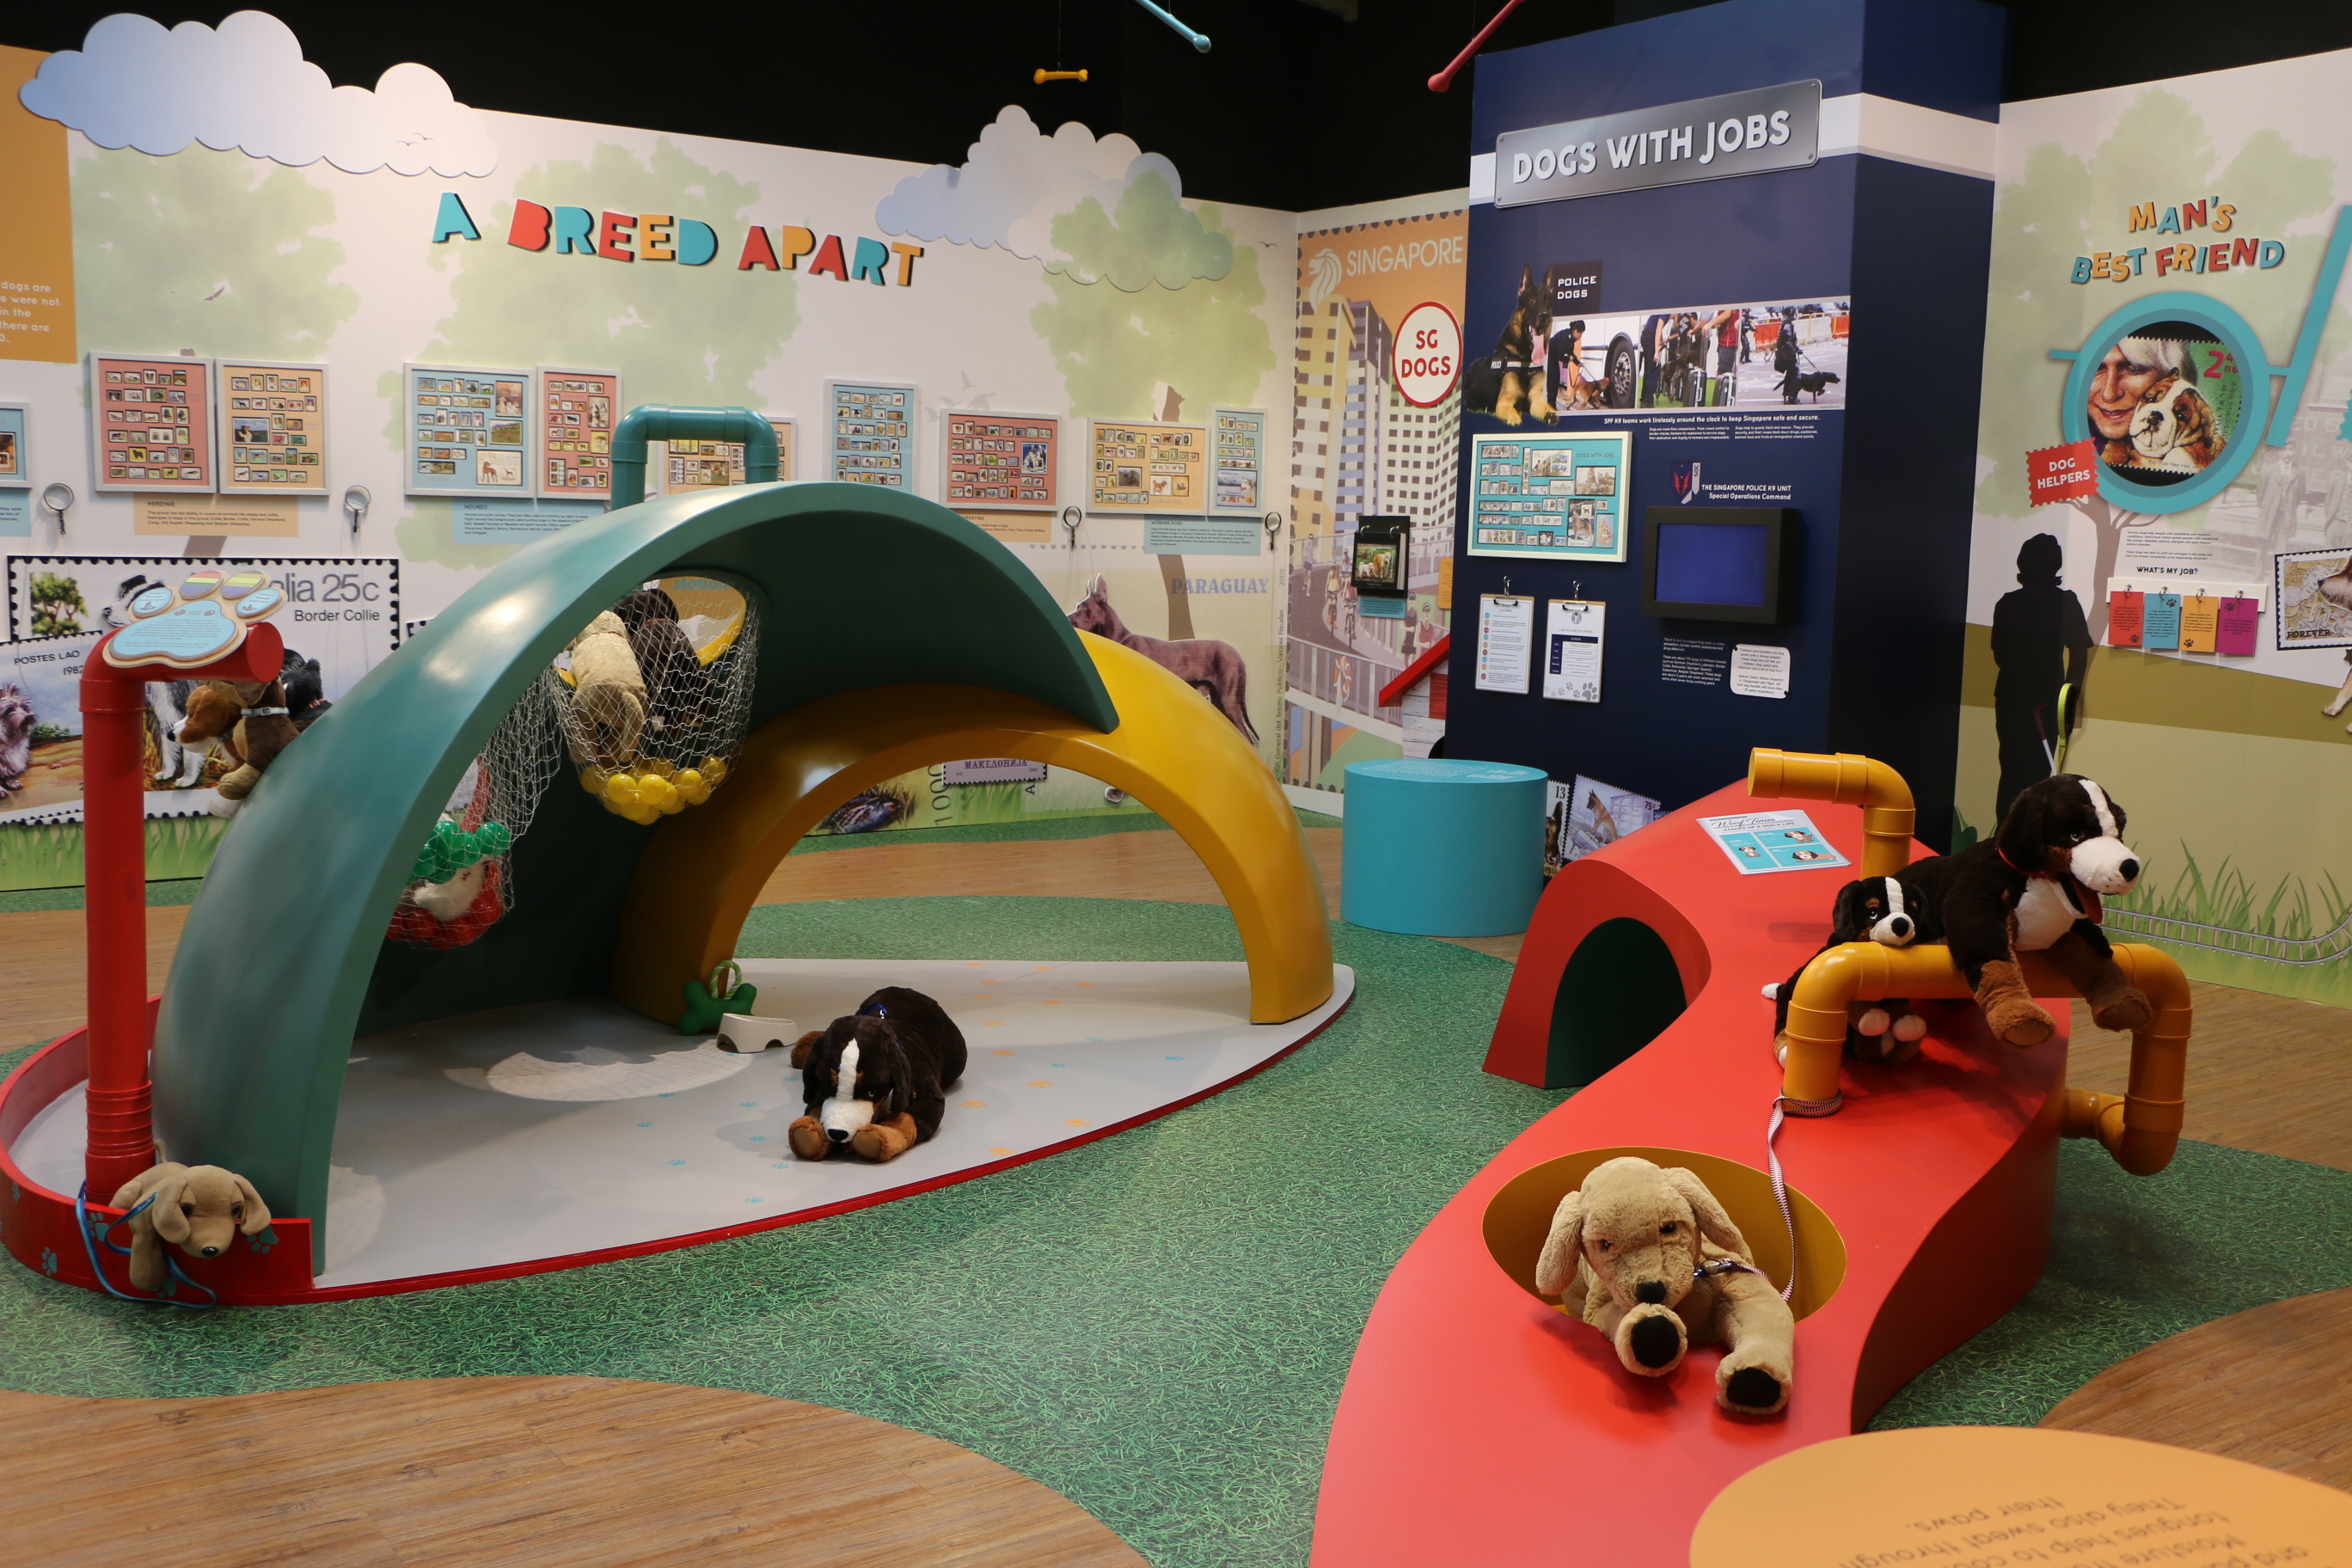 All About Dogs Children's Exhibition